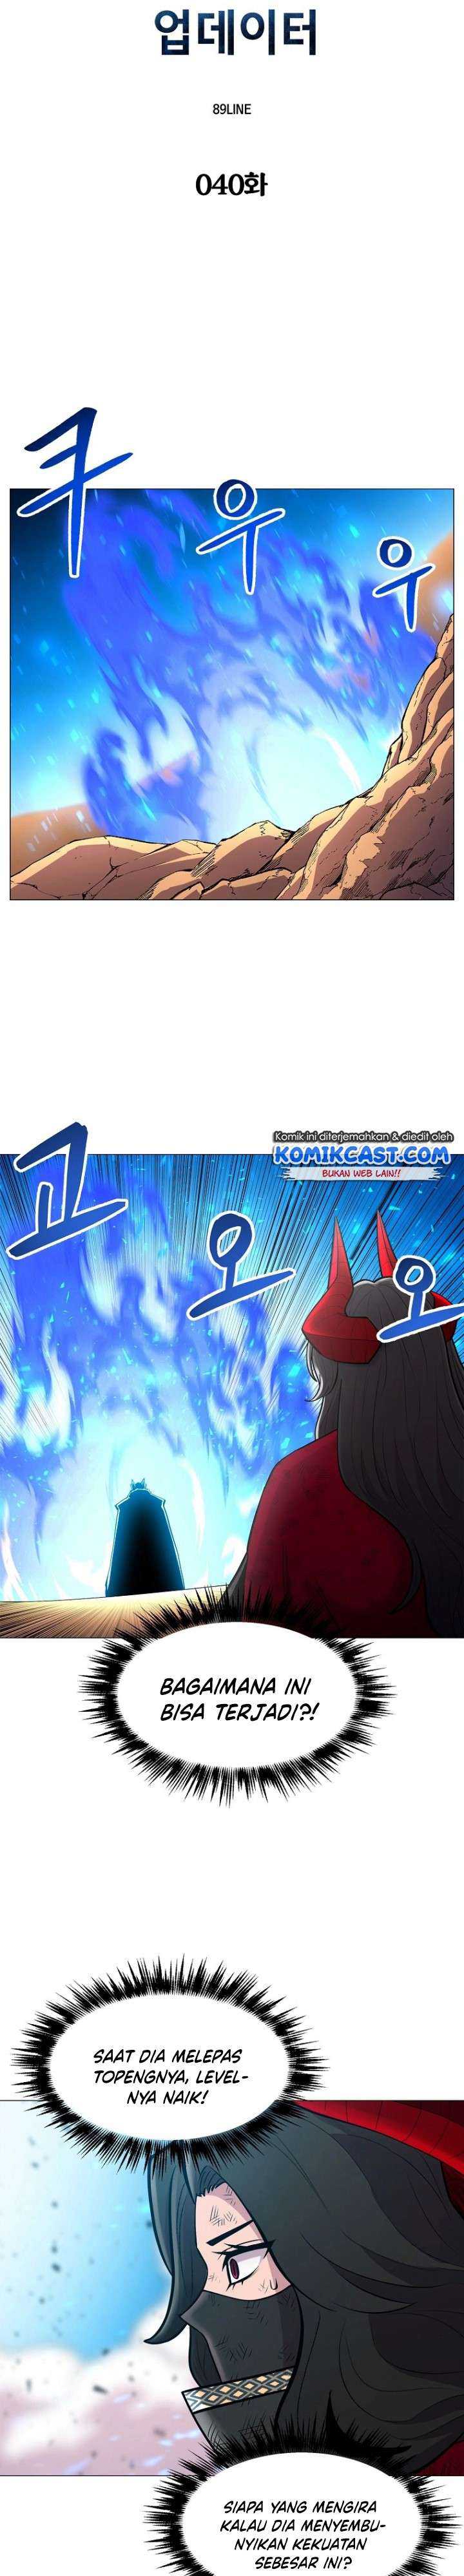 Updater Chapter 40